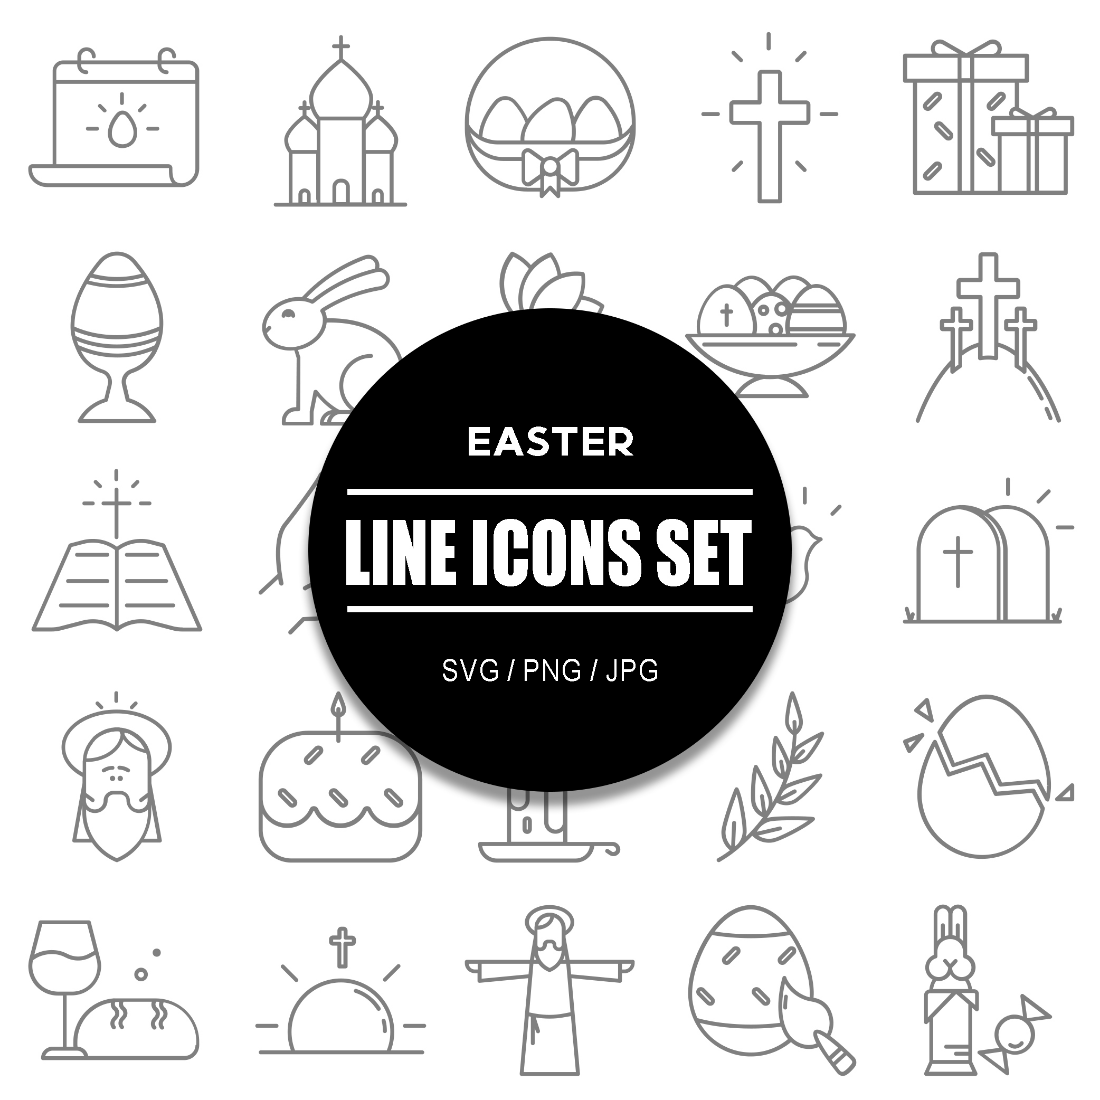 Easter Line Icons Set cover image.